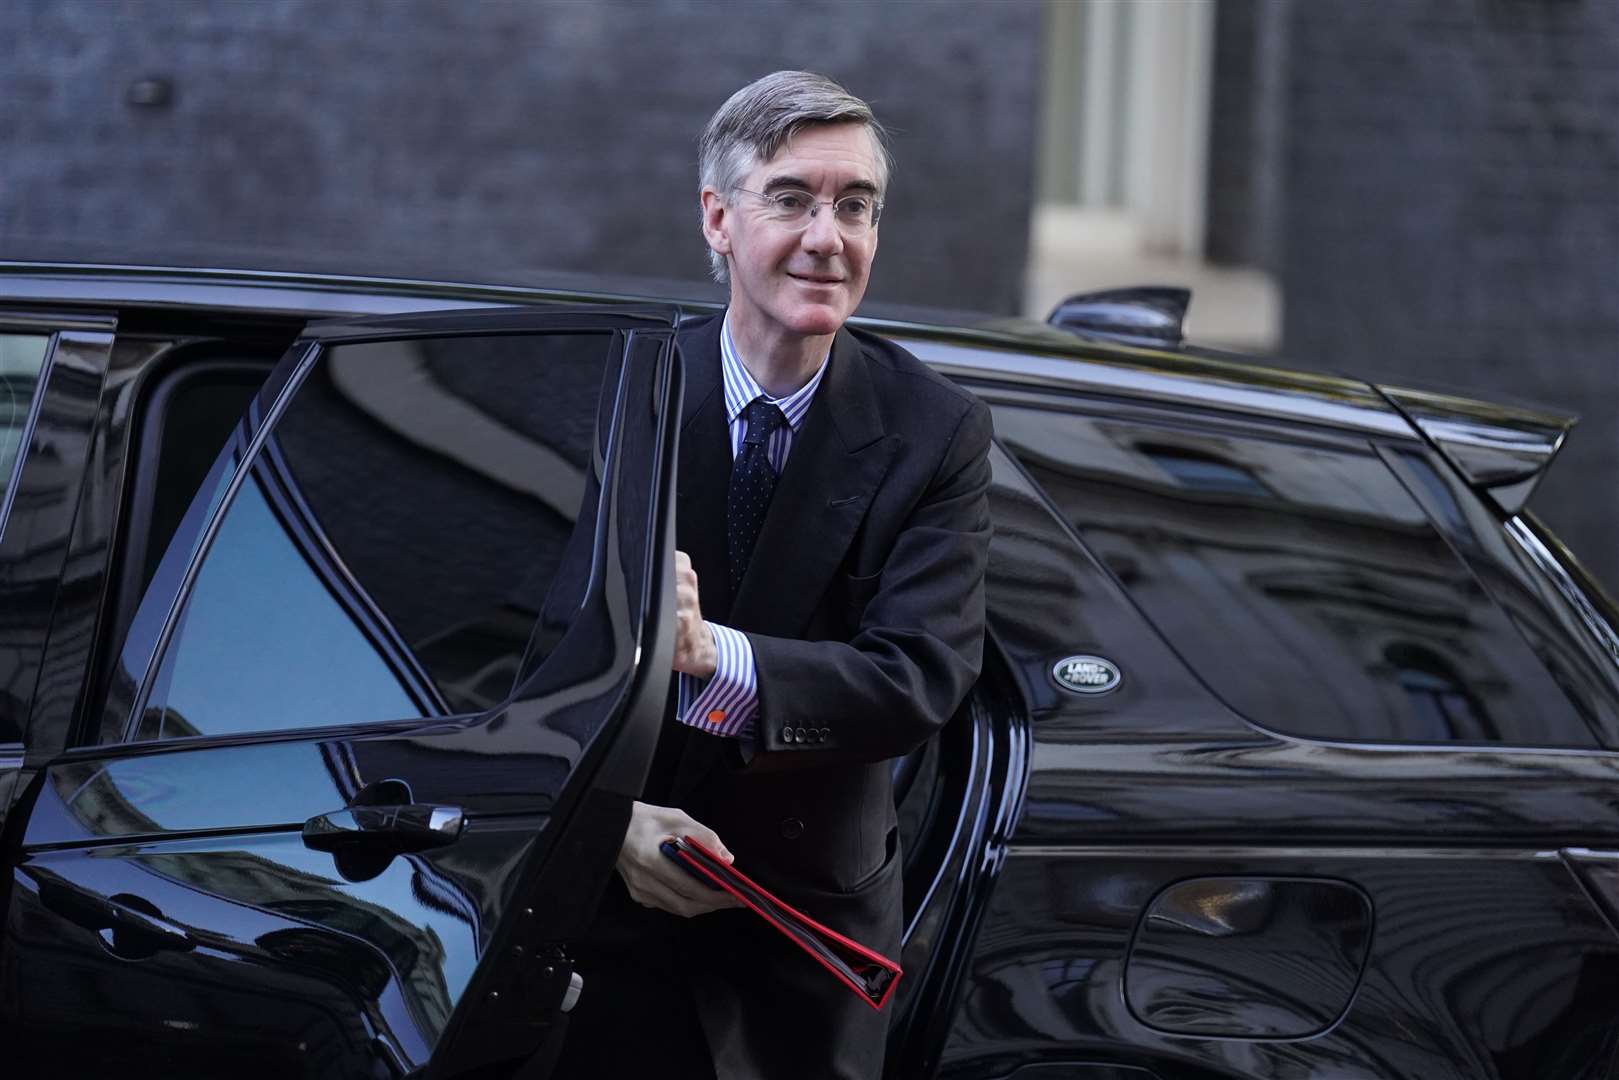 Jacob Rees-Mogg suggested in 2019 he would have ignored the “stay put” advice given to Grenfell Tower residents during the blaze, which claimed the lives of 72 people (PA)